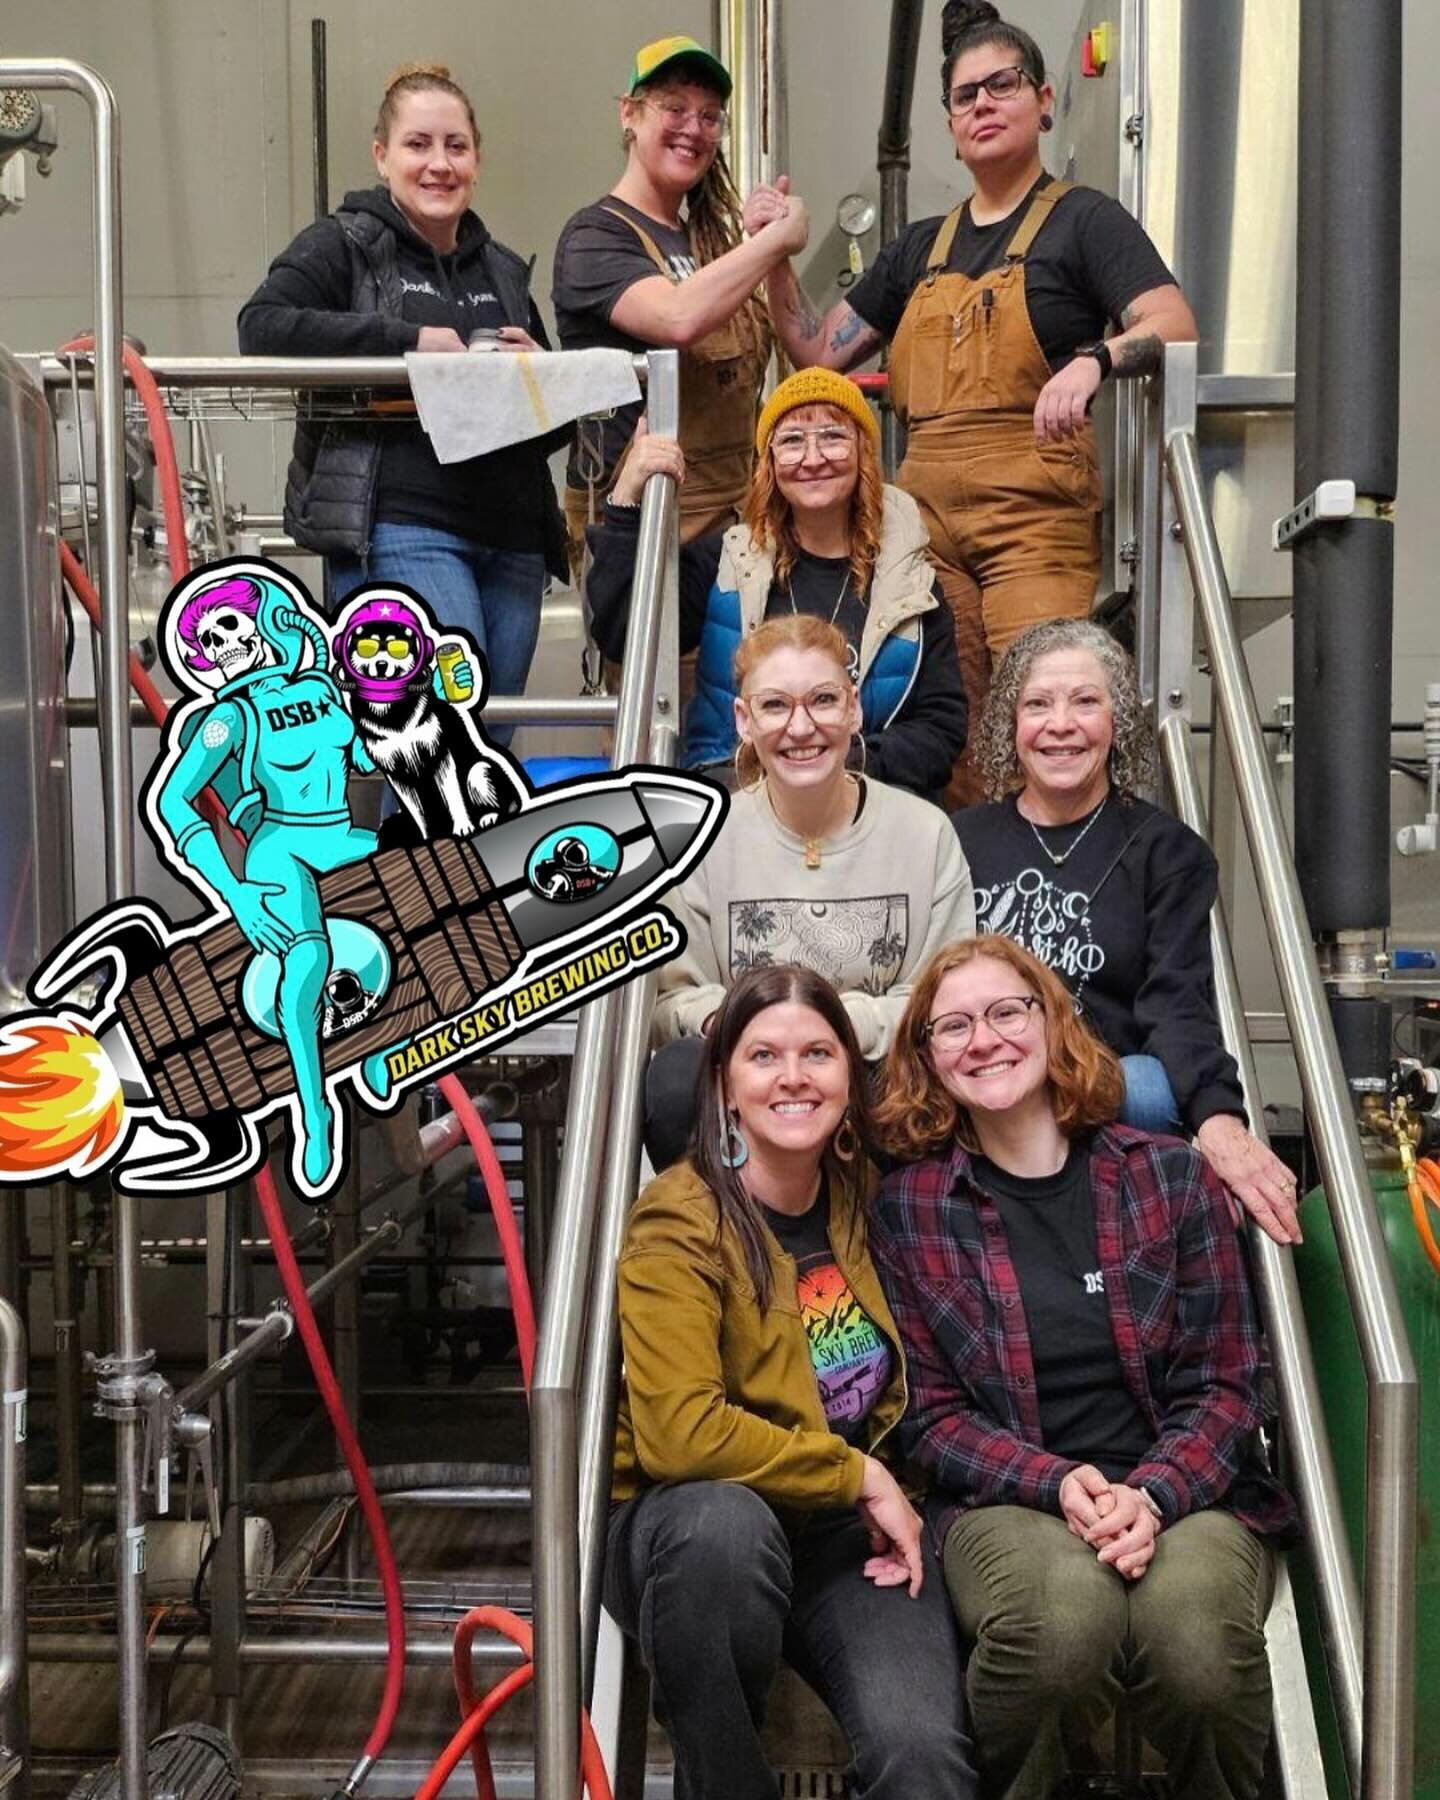 🍻Cheers to our DSB Ladies🍻

Happy International Women&rsquo;s Day! 
Here&rsquo;s to all the incredible women of DSB making a difference in our little piece of the world every day. Let&rsquo;s keep breaking all the barriers and building a more equal